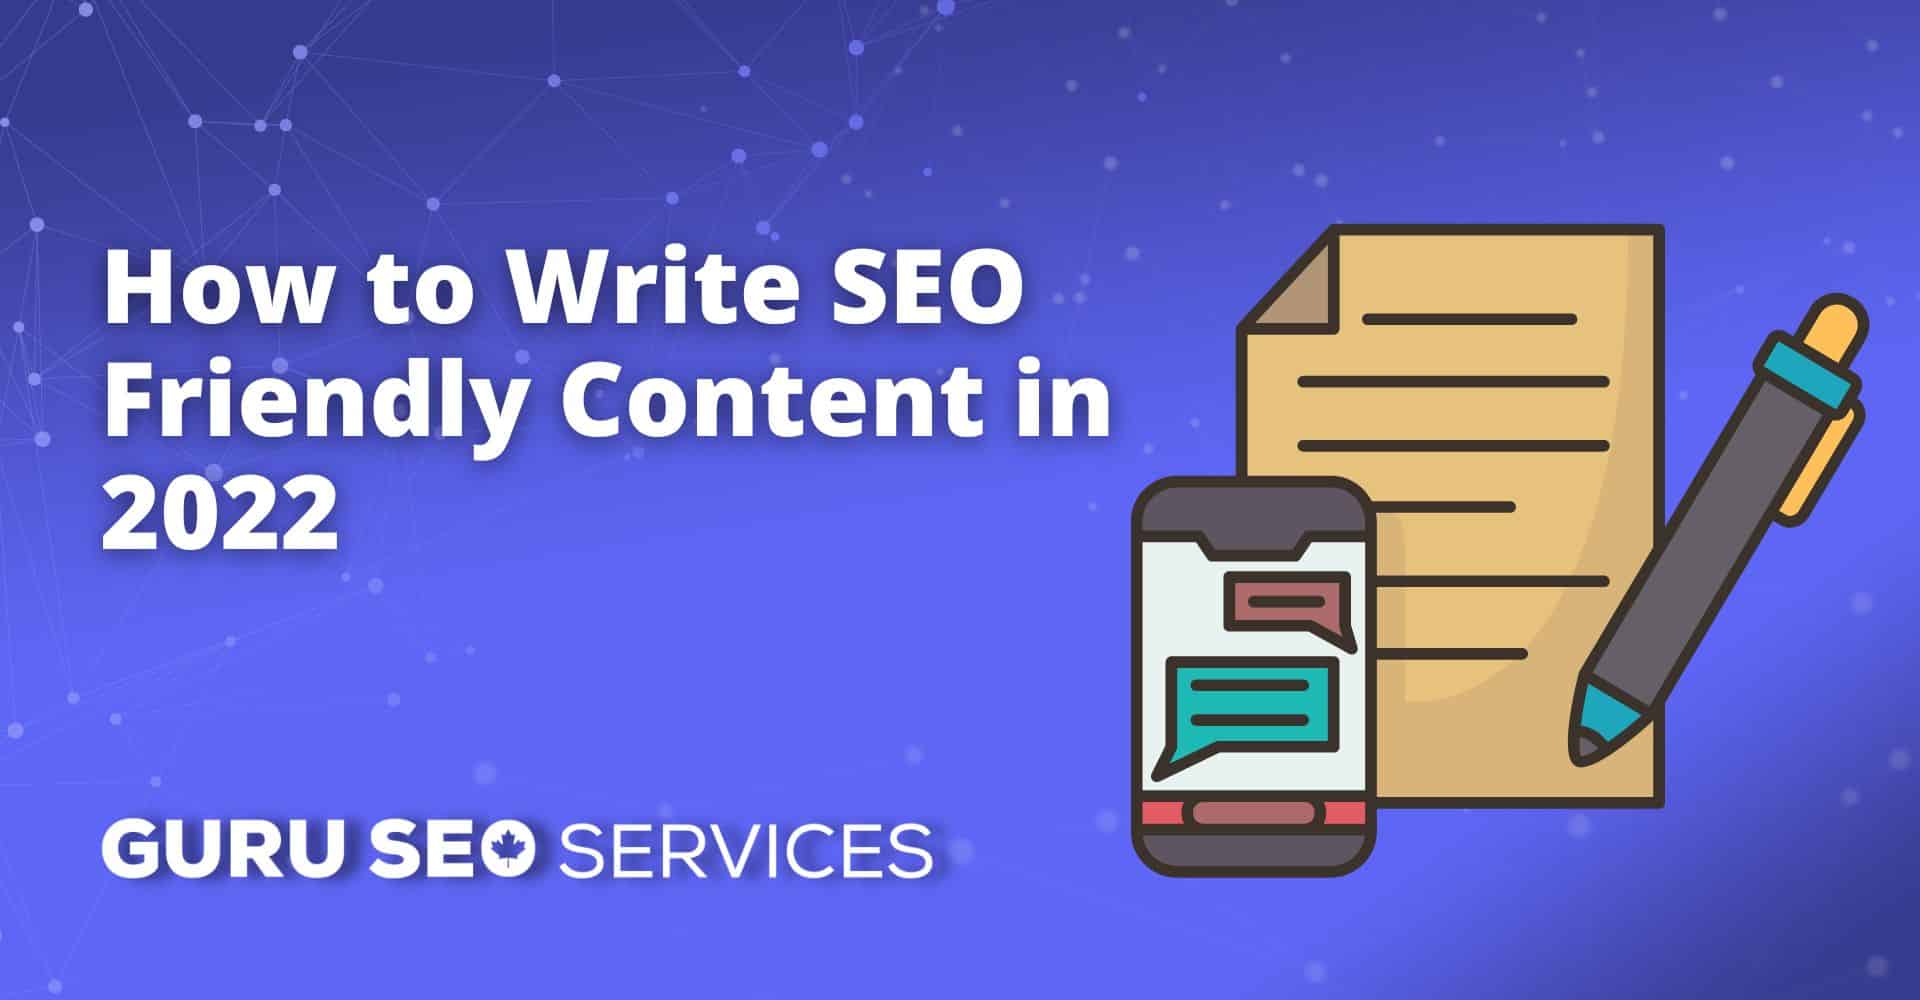 Learn how to write SEO friendly content in 2021, with a focus on web design.